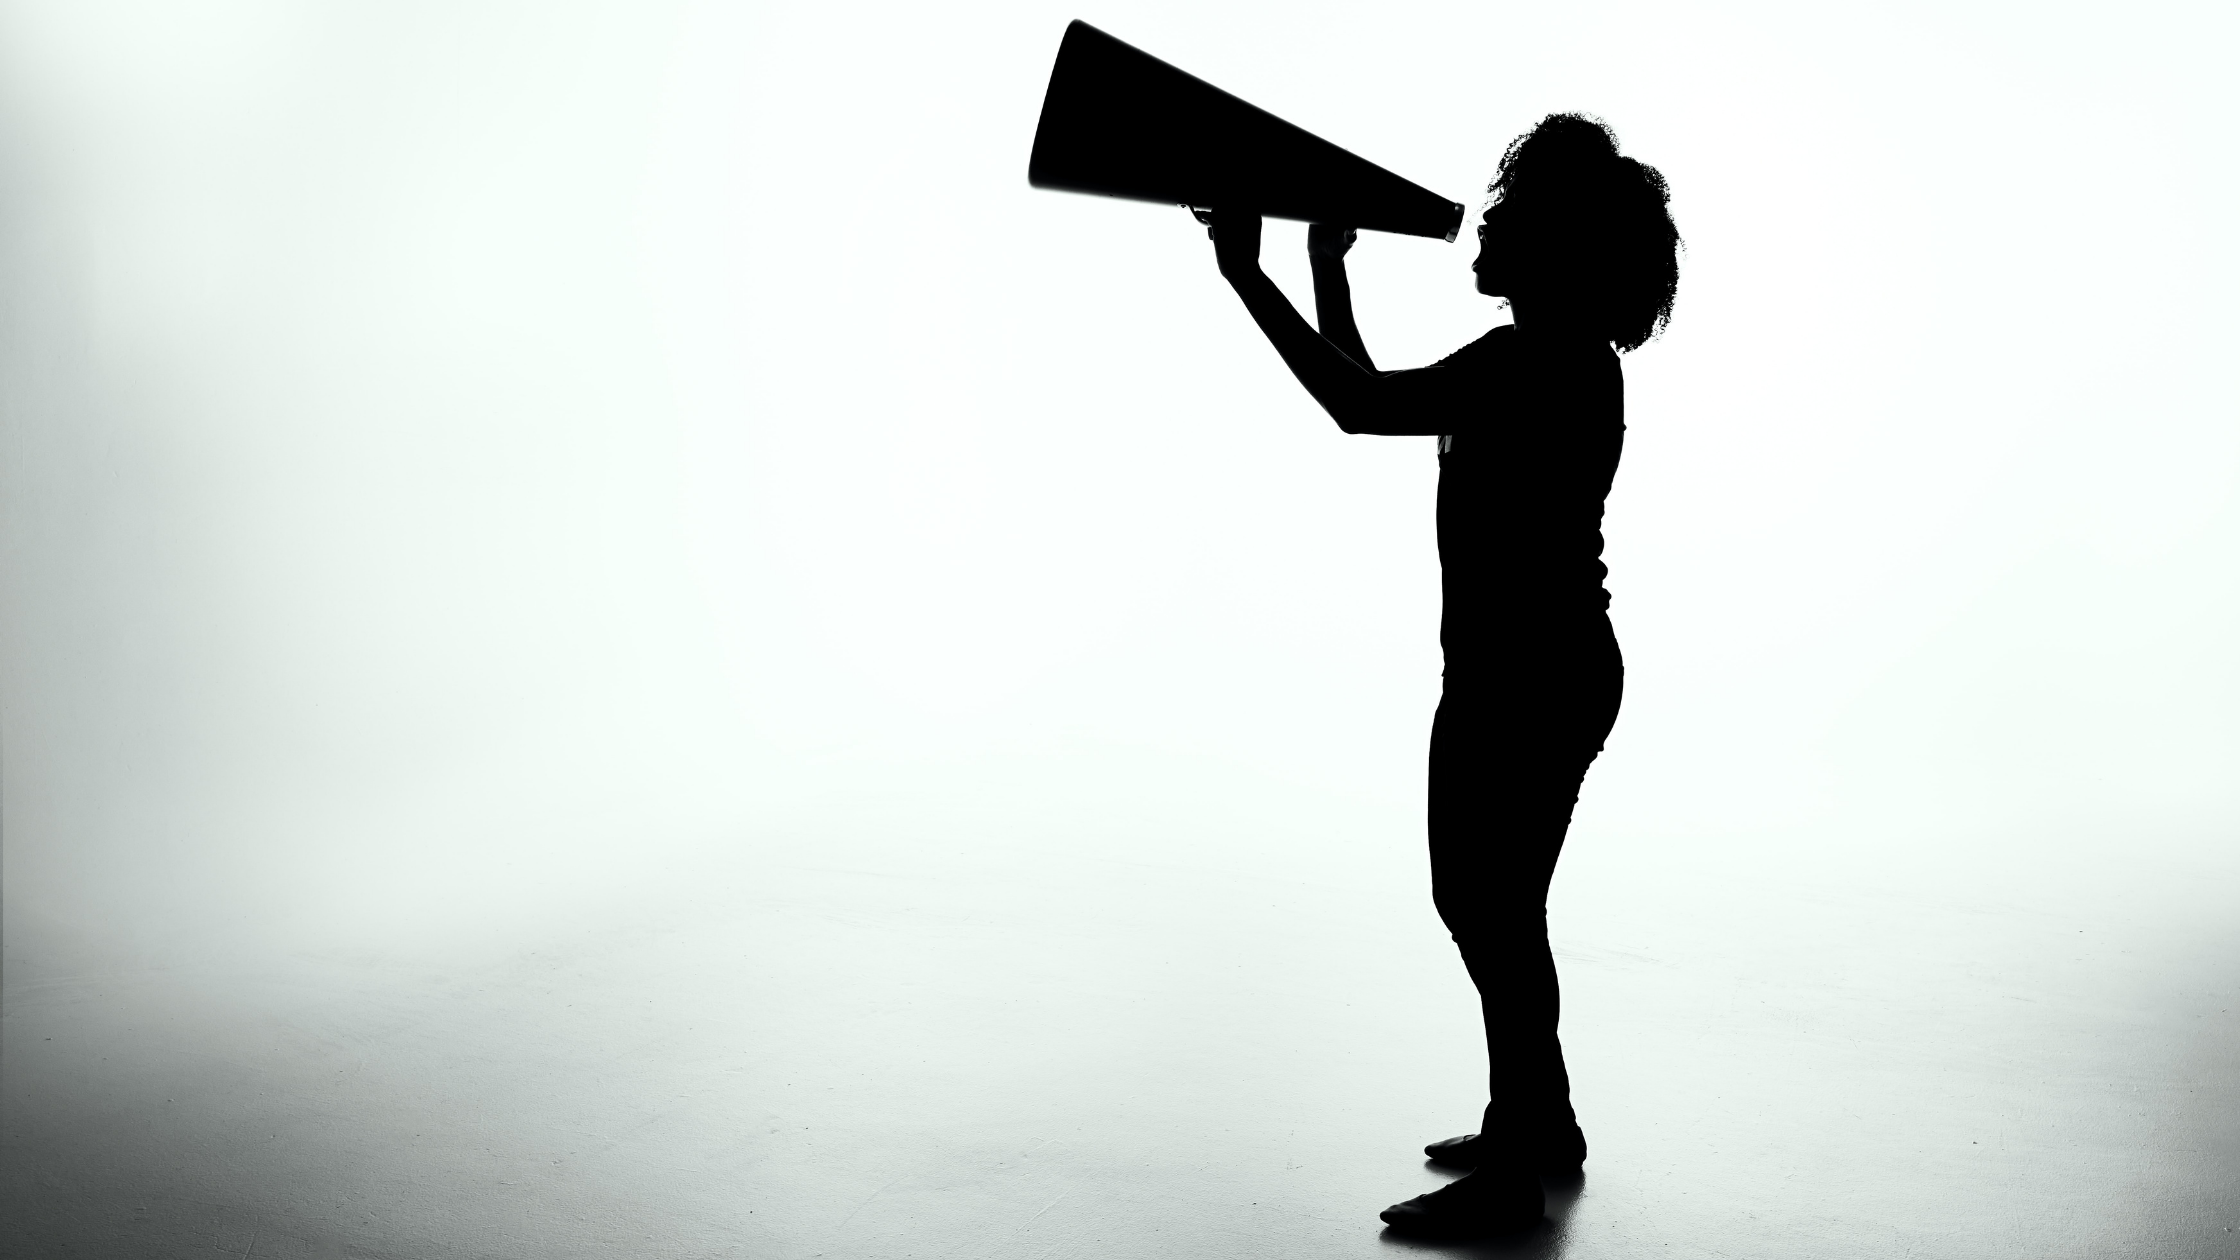 A silhouette of a person speaking into a megaphone.